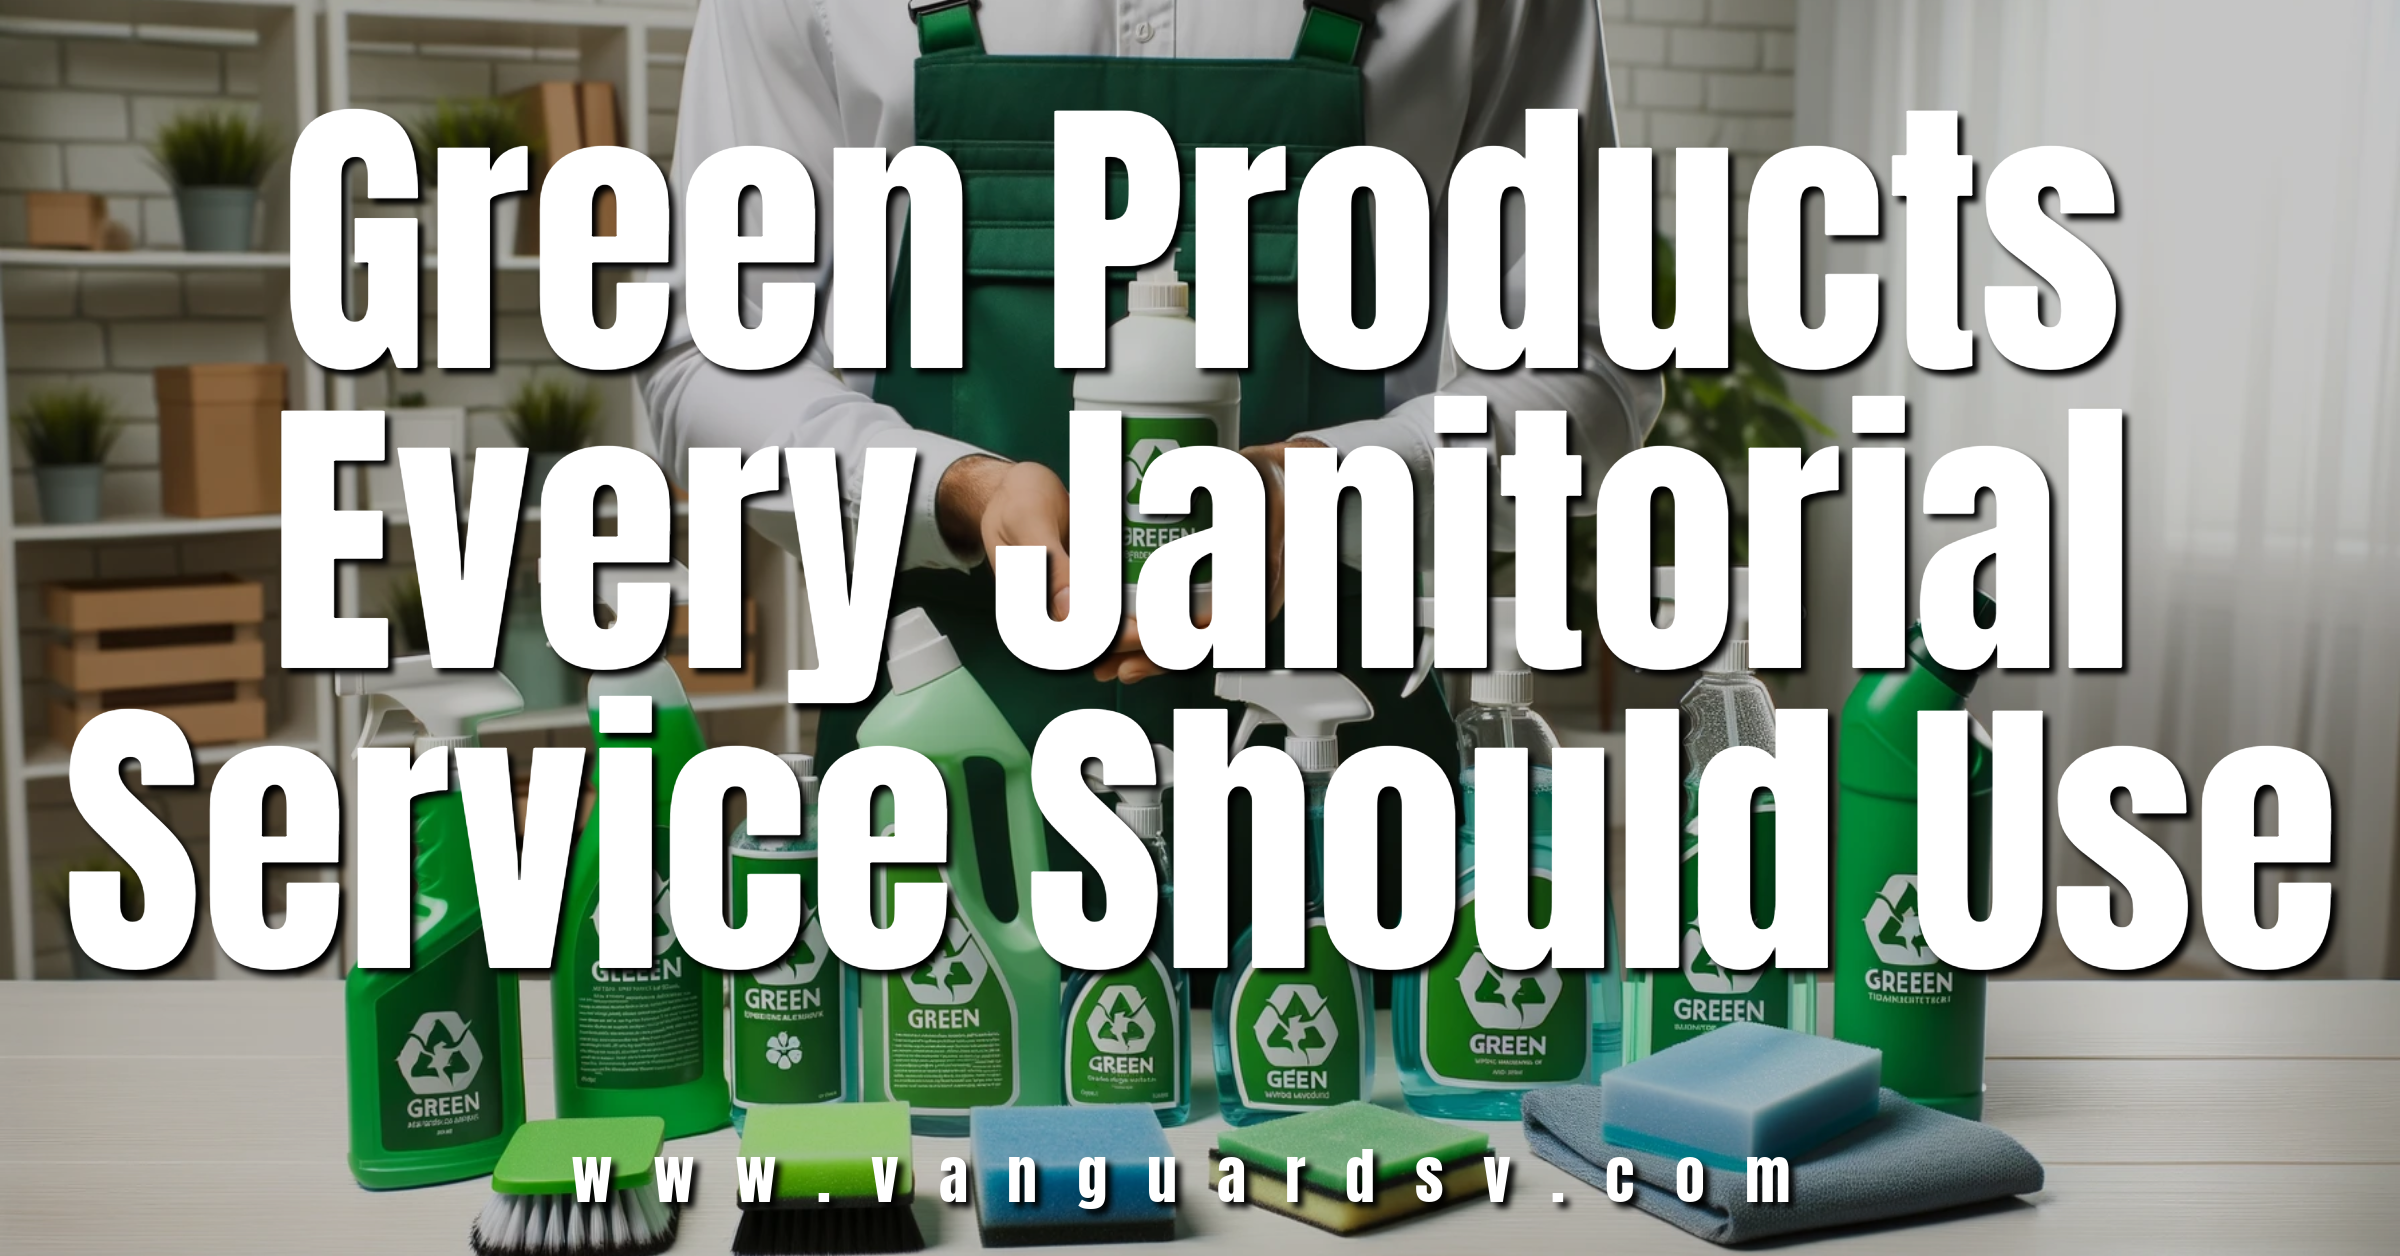 Green Products Every Janitorial Service Should Use